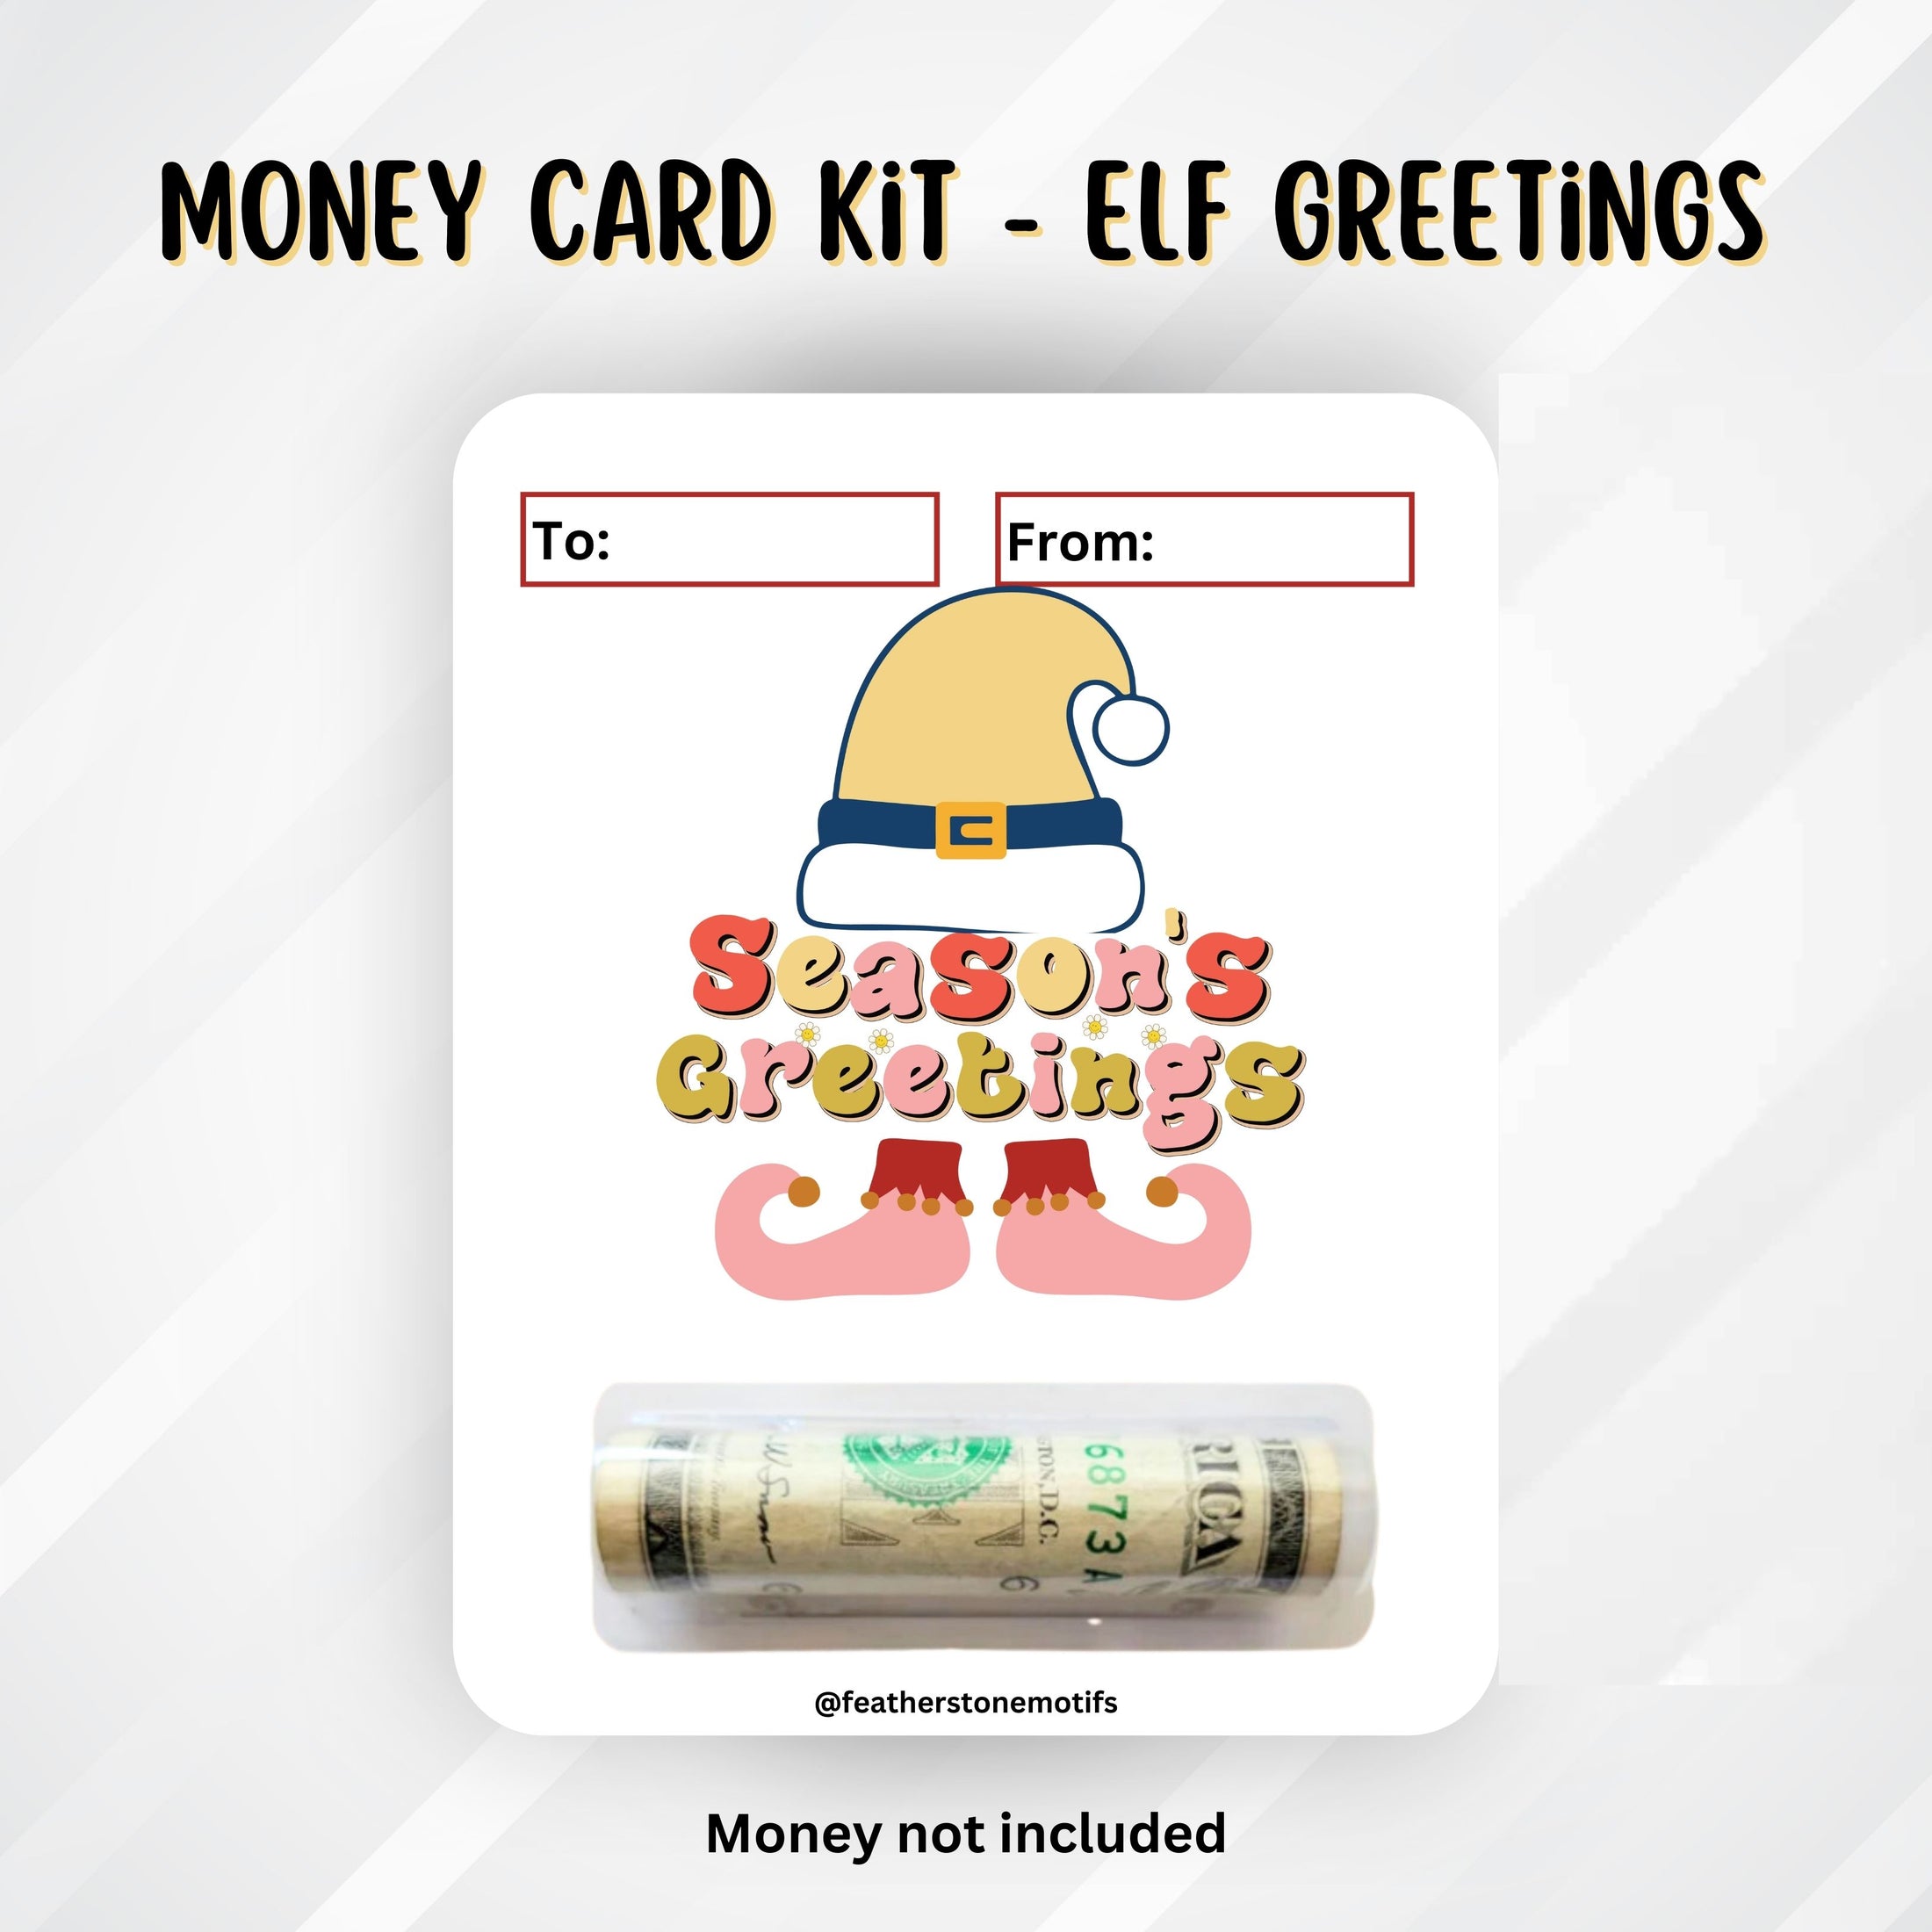 This image shows the money tube attached to the Elf Greetings money card.